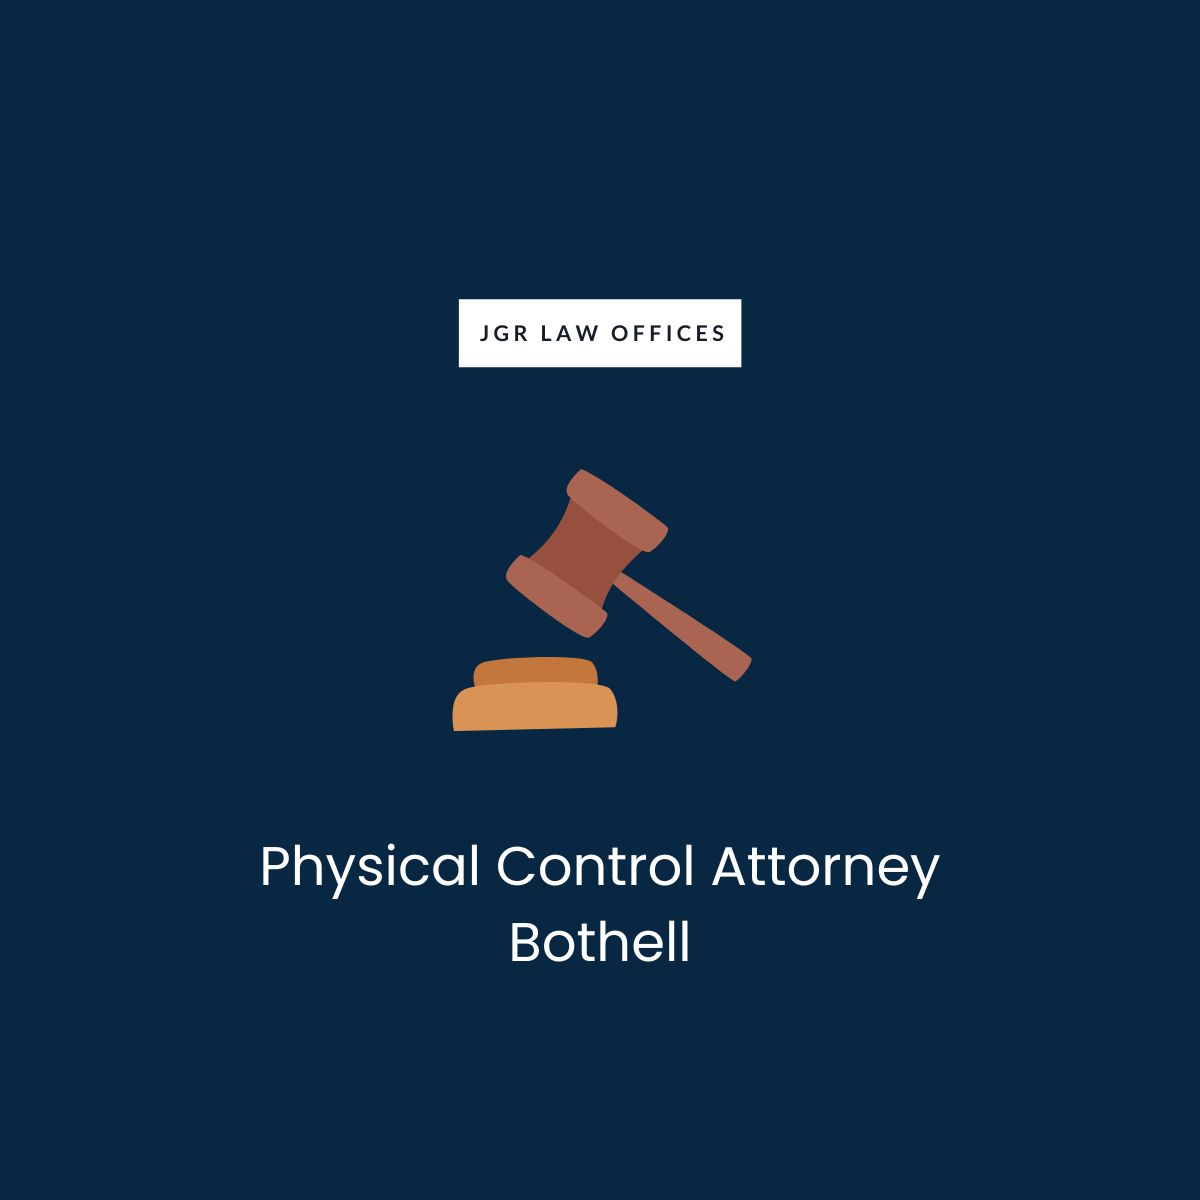 Physical Control Attorney Bothell